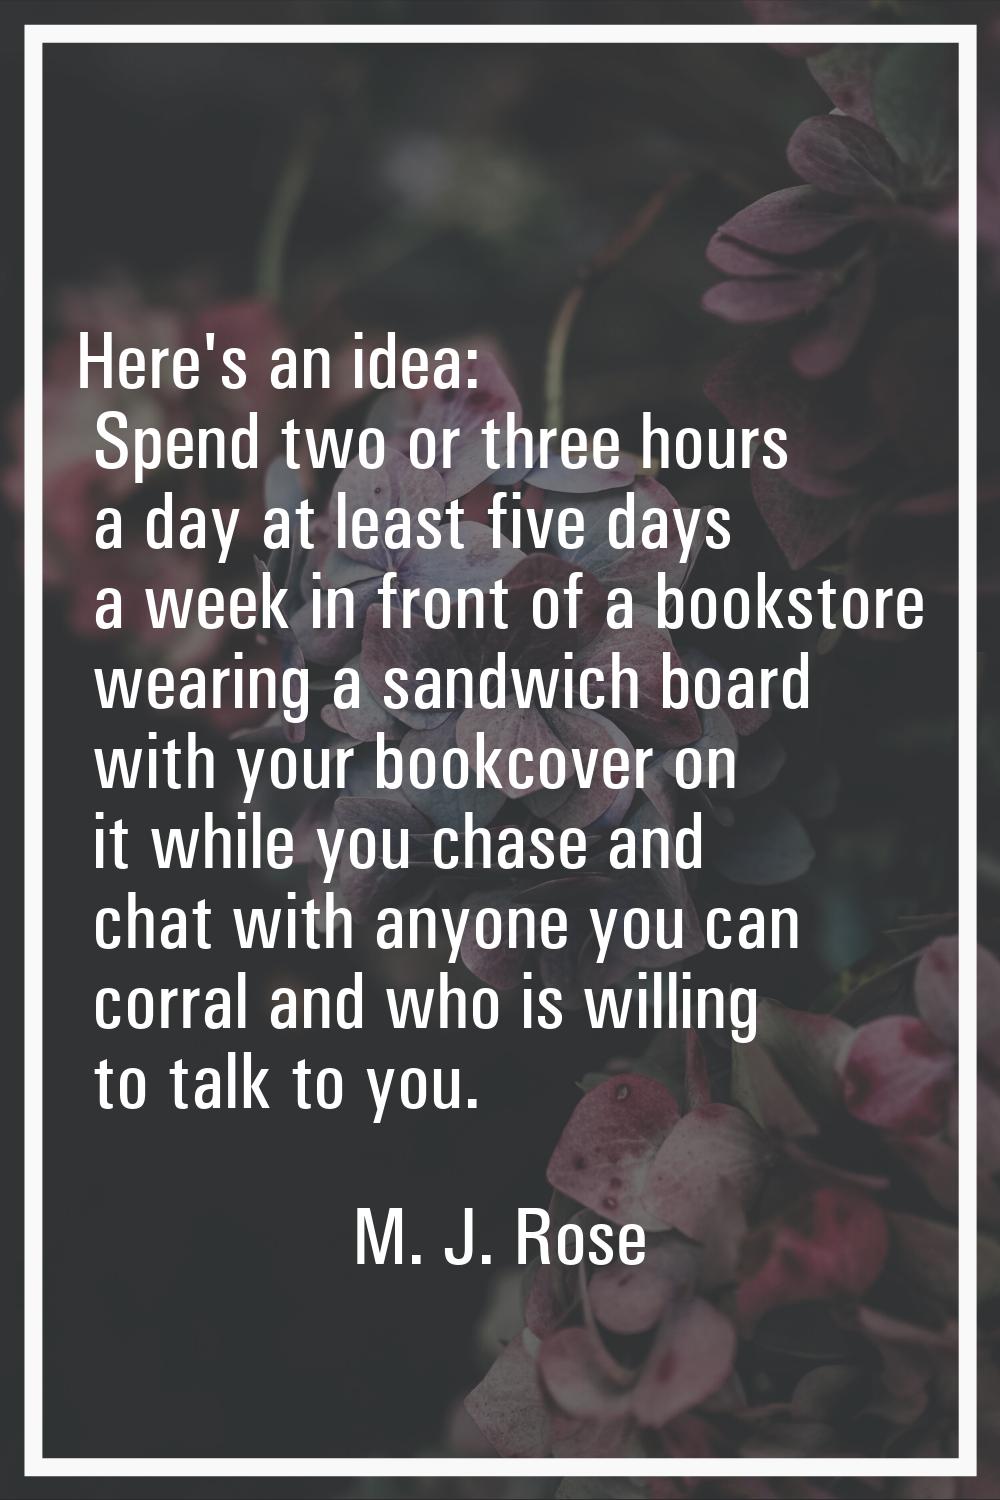 Here's an idea: Spend two or three hours a day at least five days a week in front of a bookstore we